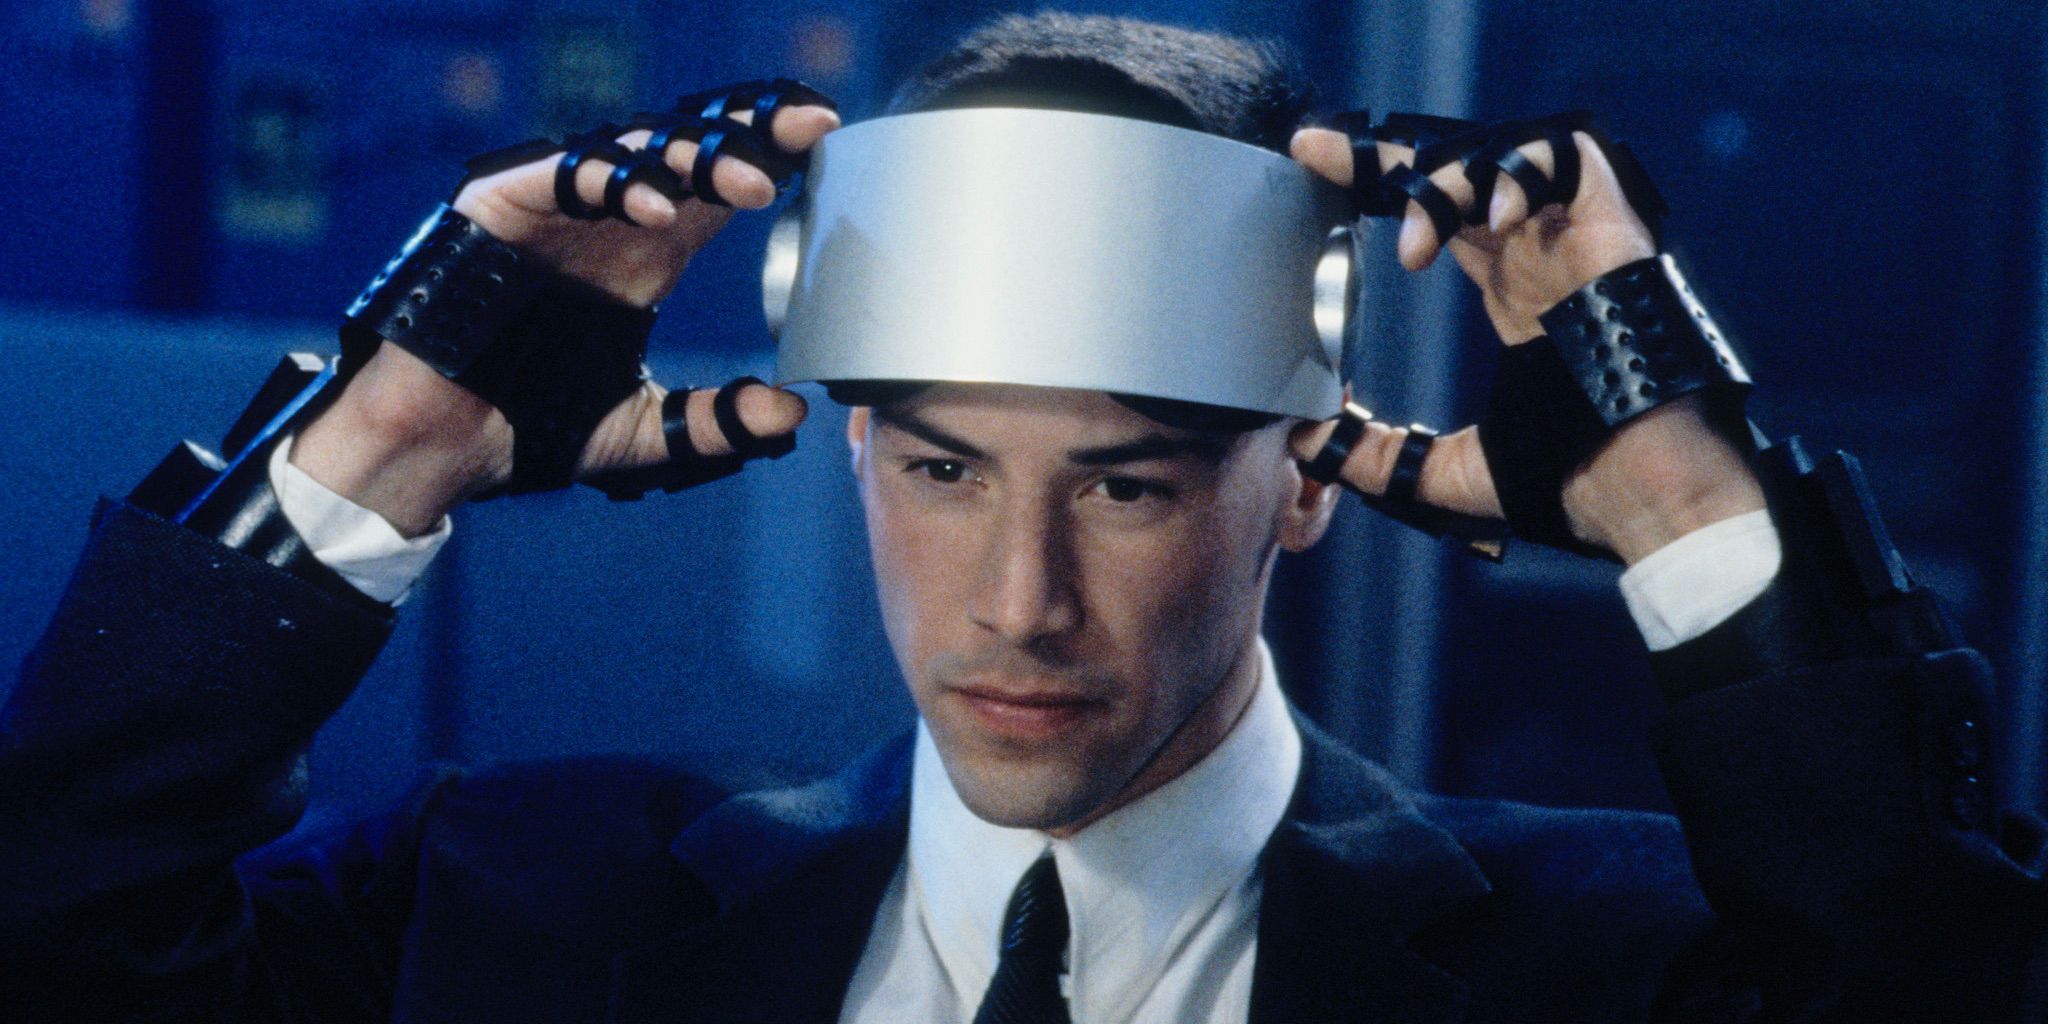 Johnny Mnemonic about to put on an eye mask.